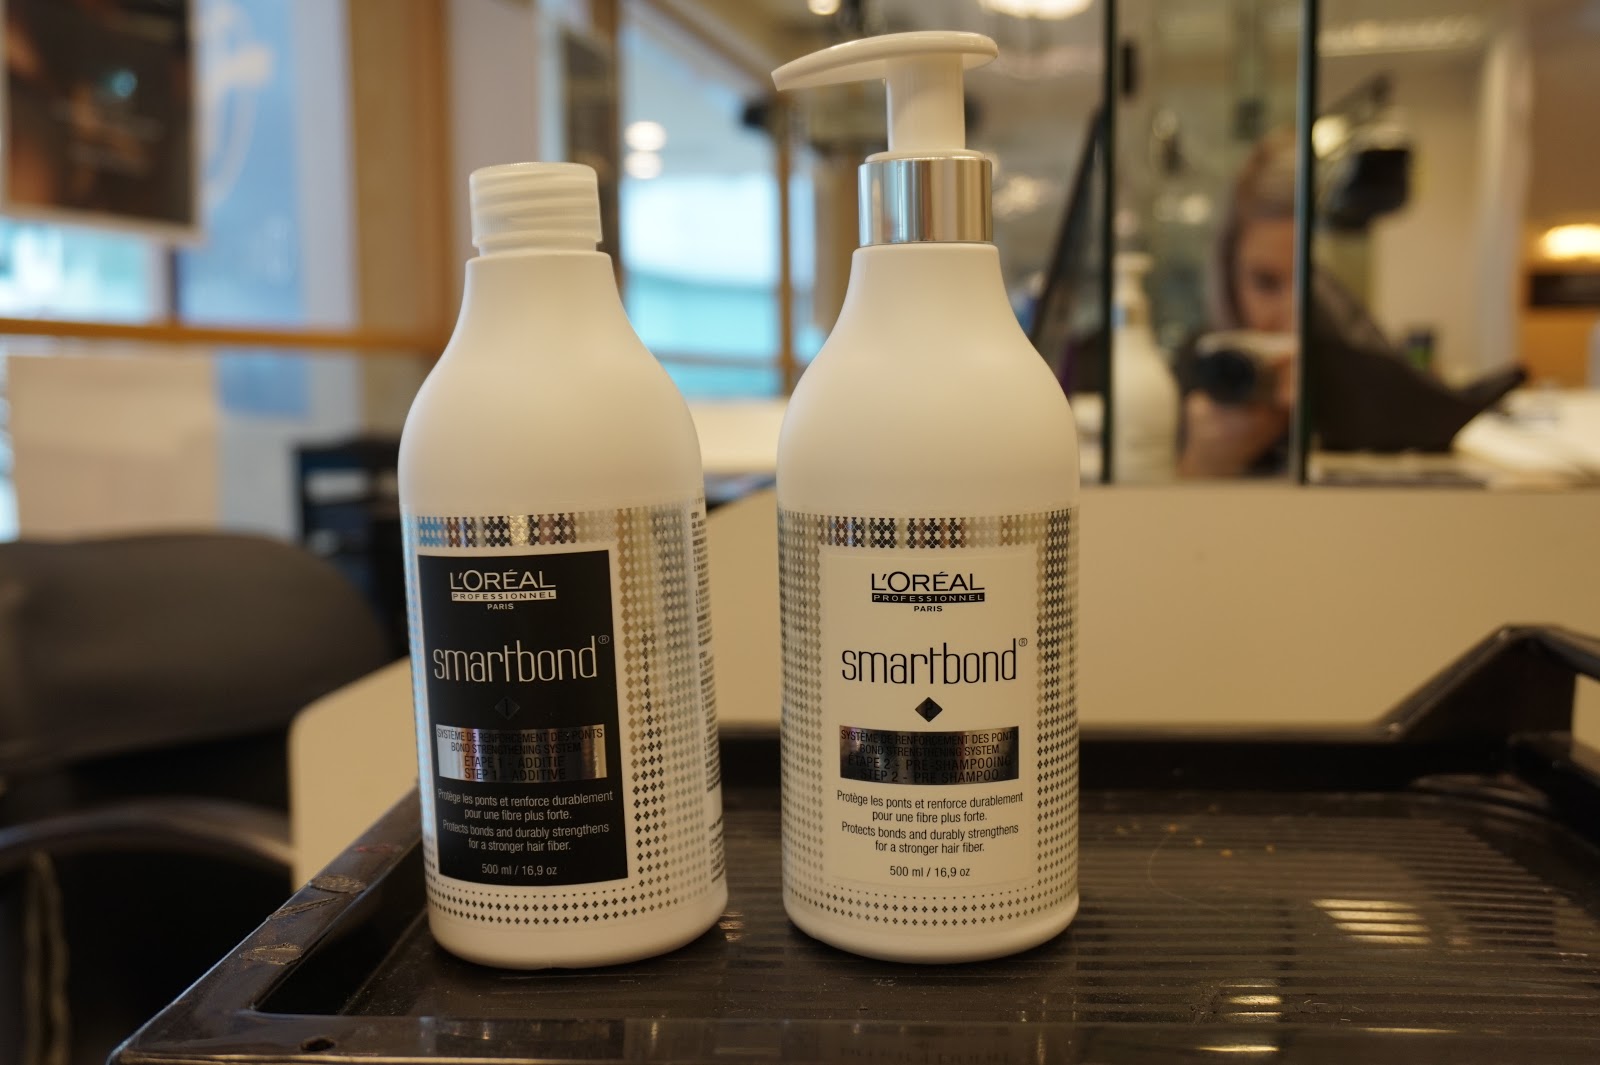 Floral Danielle: Dying my hair silver - L'Oreal Smartbond at Regis Hair  Salons!